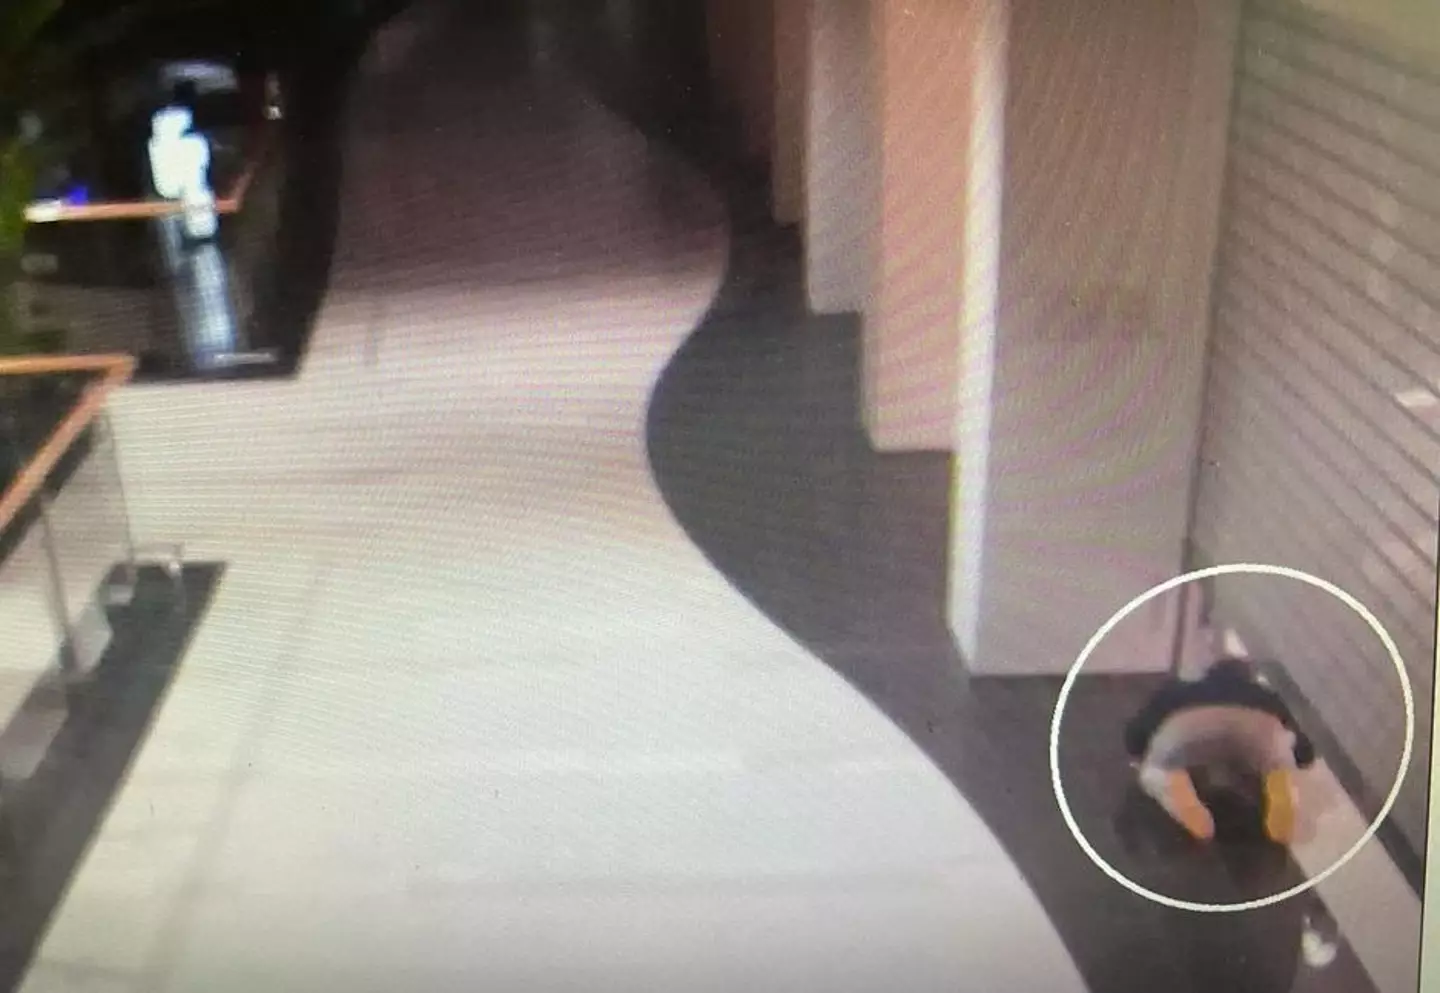 CCTV shows the alleged crime spree around the mall.